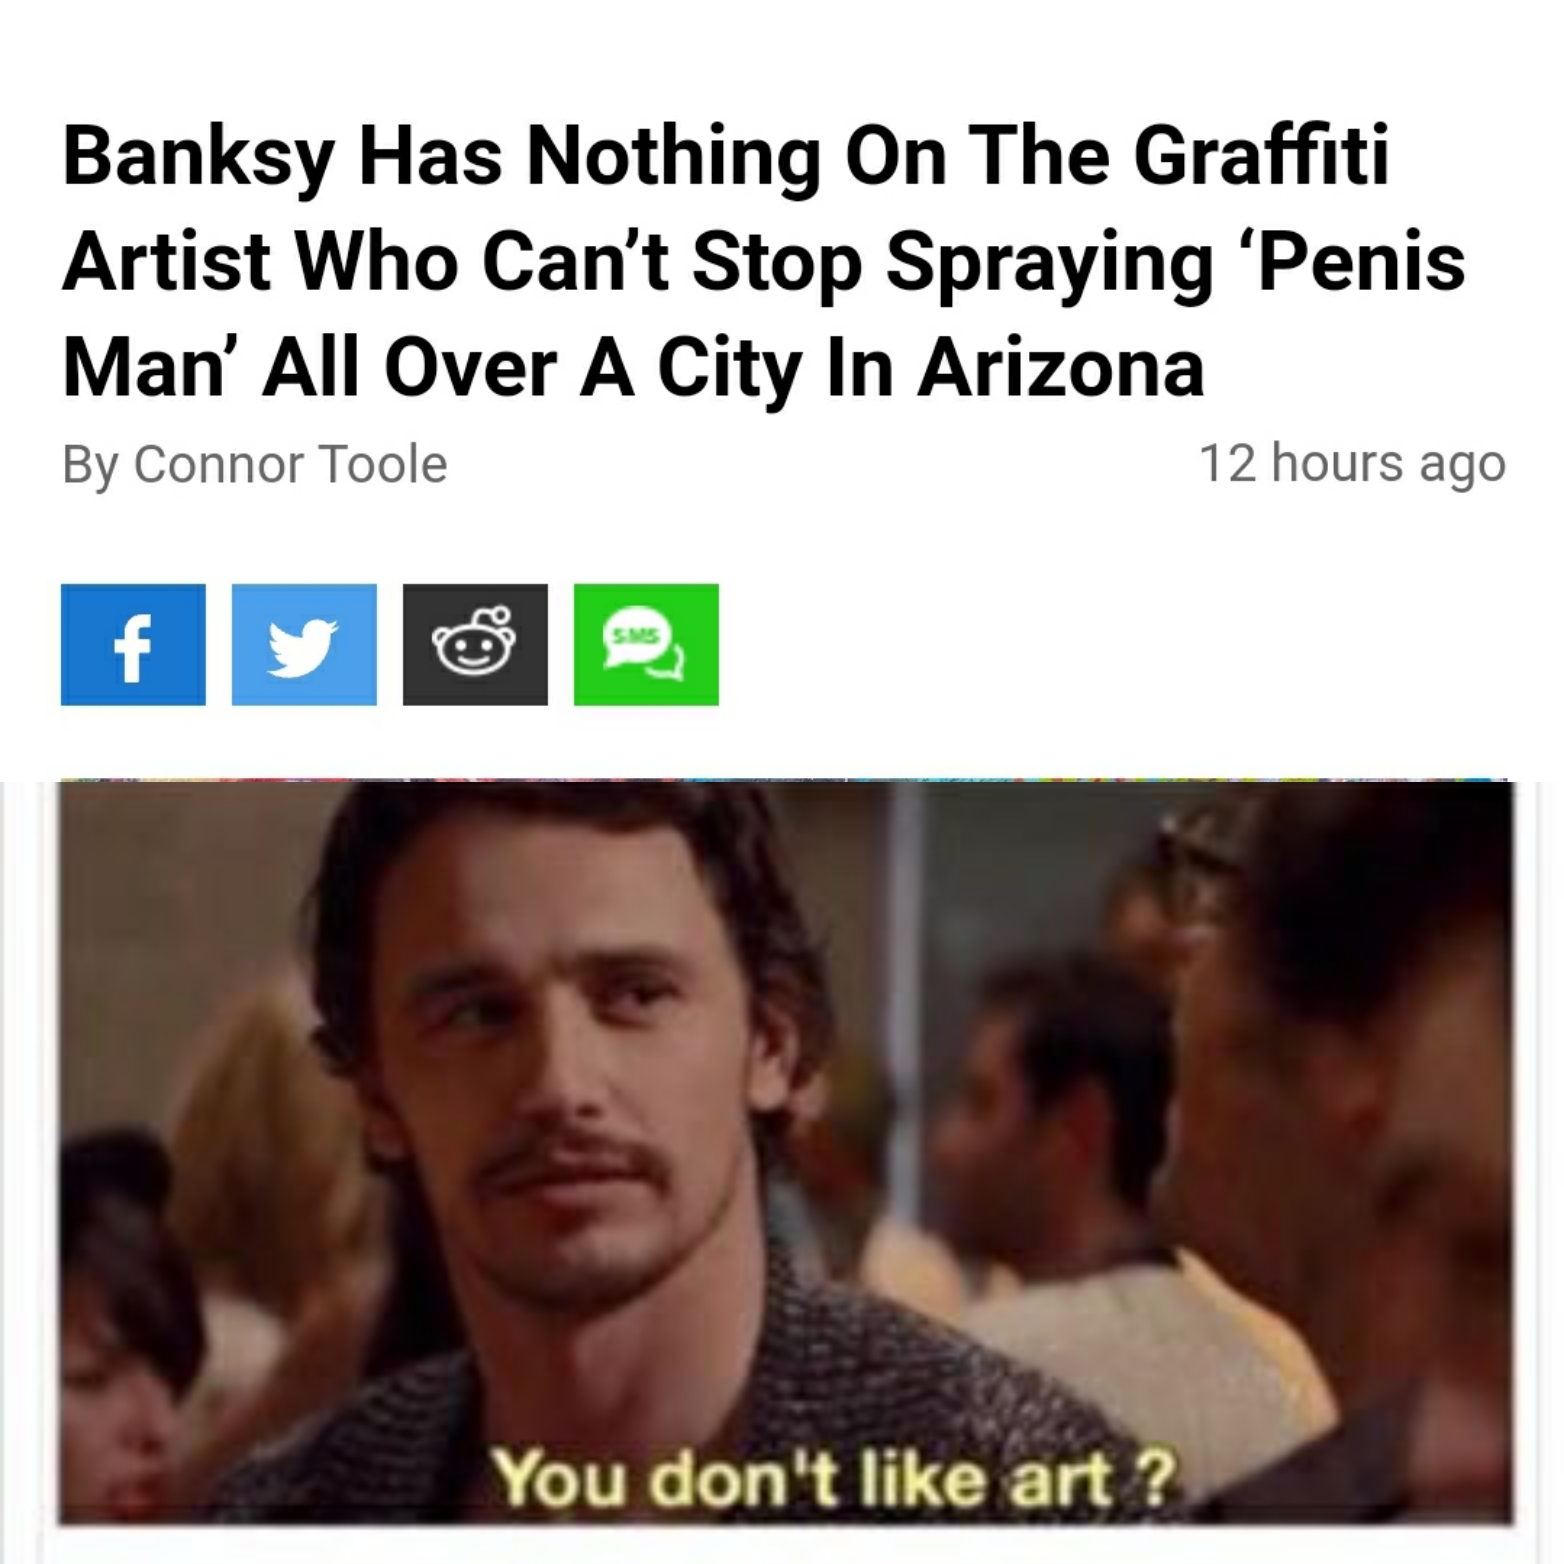 you don t like art meme - Banksy Has Nothing On The Graffiti Artist Who Can't Stop Spraying 'Penis Man' All Over A City In Arizona By Connor Toole 12 hours ago You don't art?